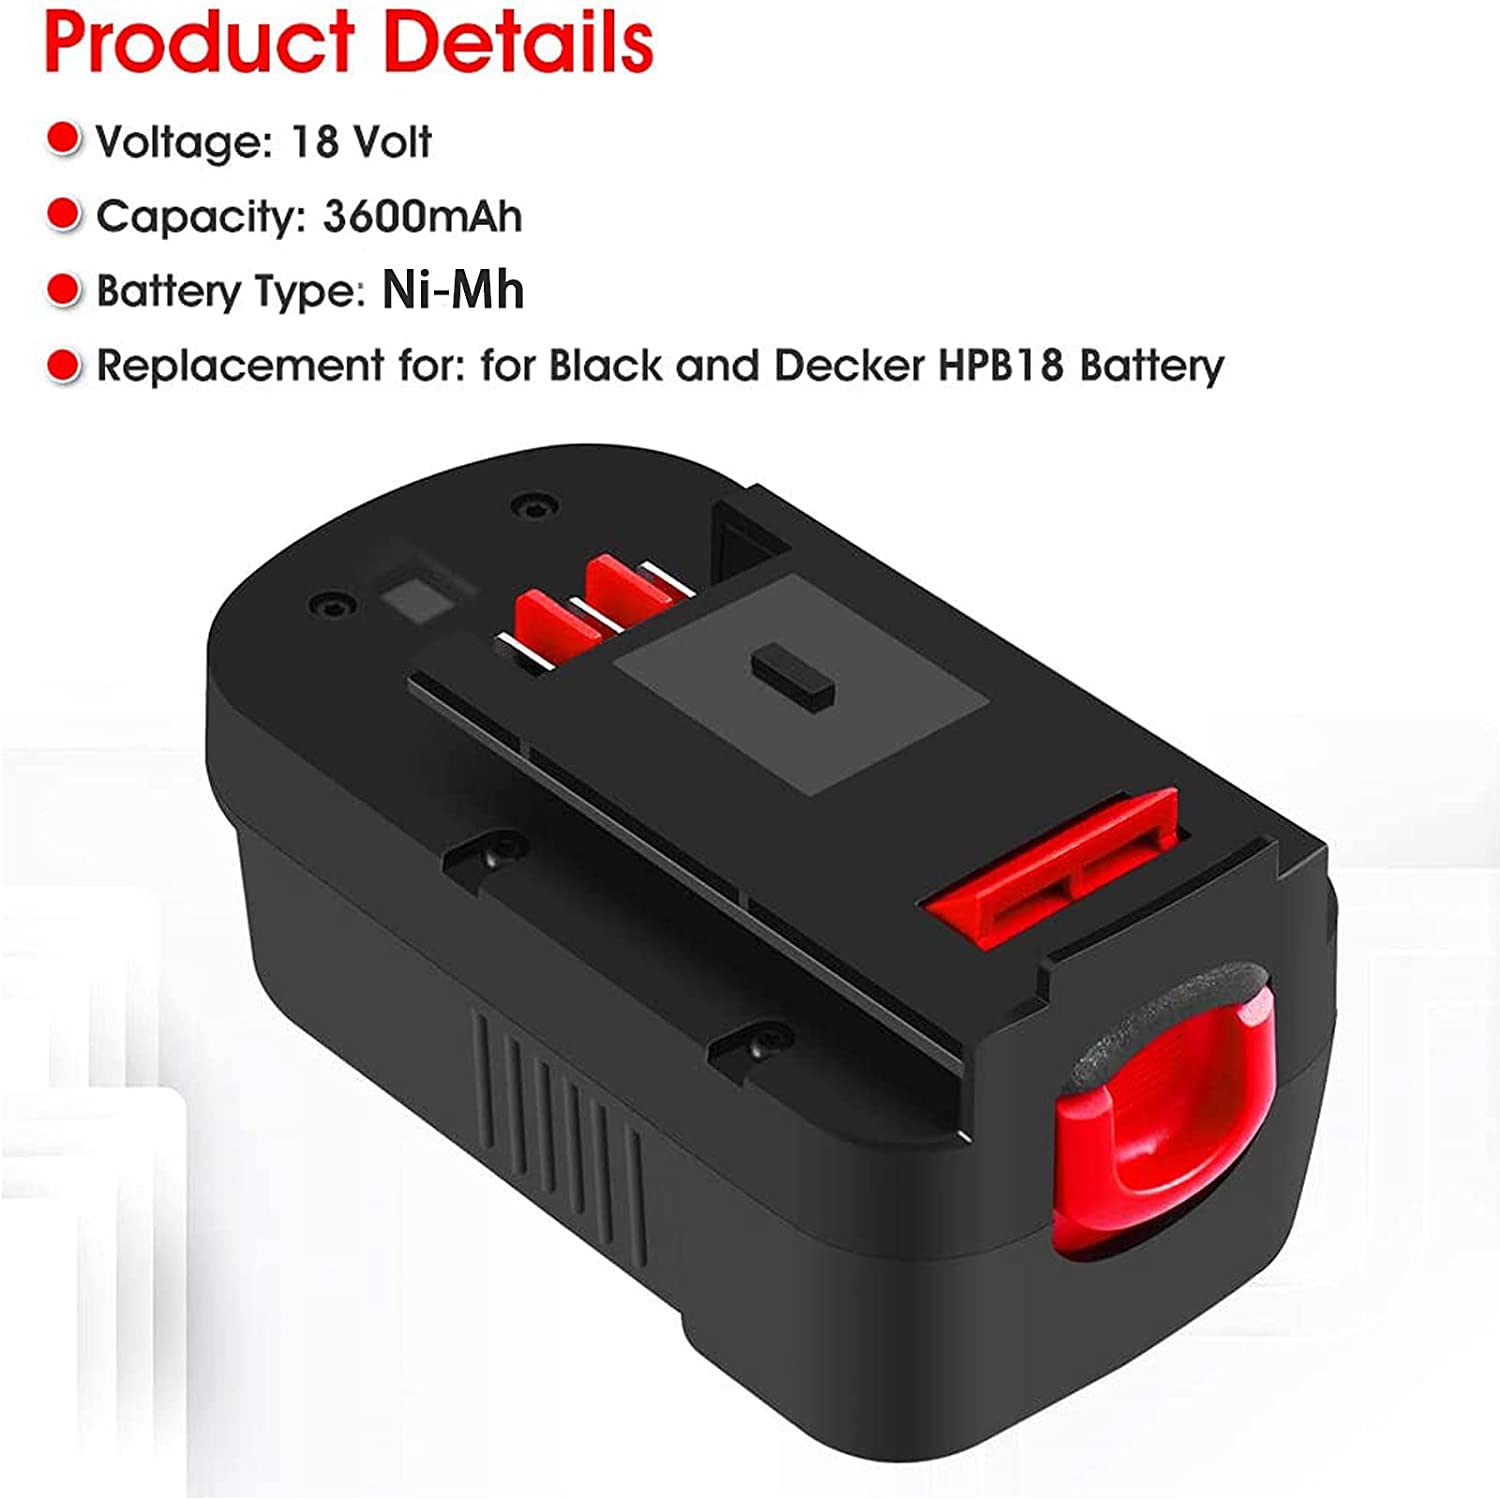 Upgraded to 3600mAh HPB18 Battery for Black and Decker 18V Battery 3.6Ah HPB18-OPE 244760-00 A1718 FSB18 Firestorm 2-Pack 